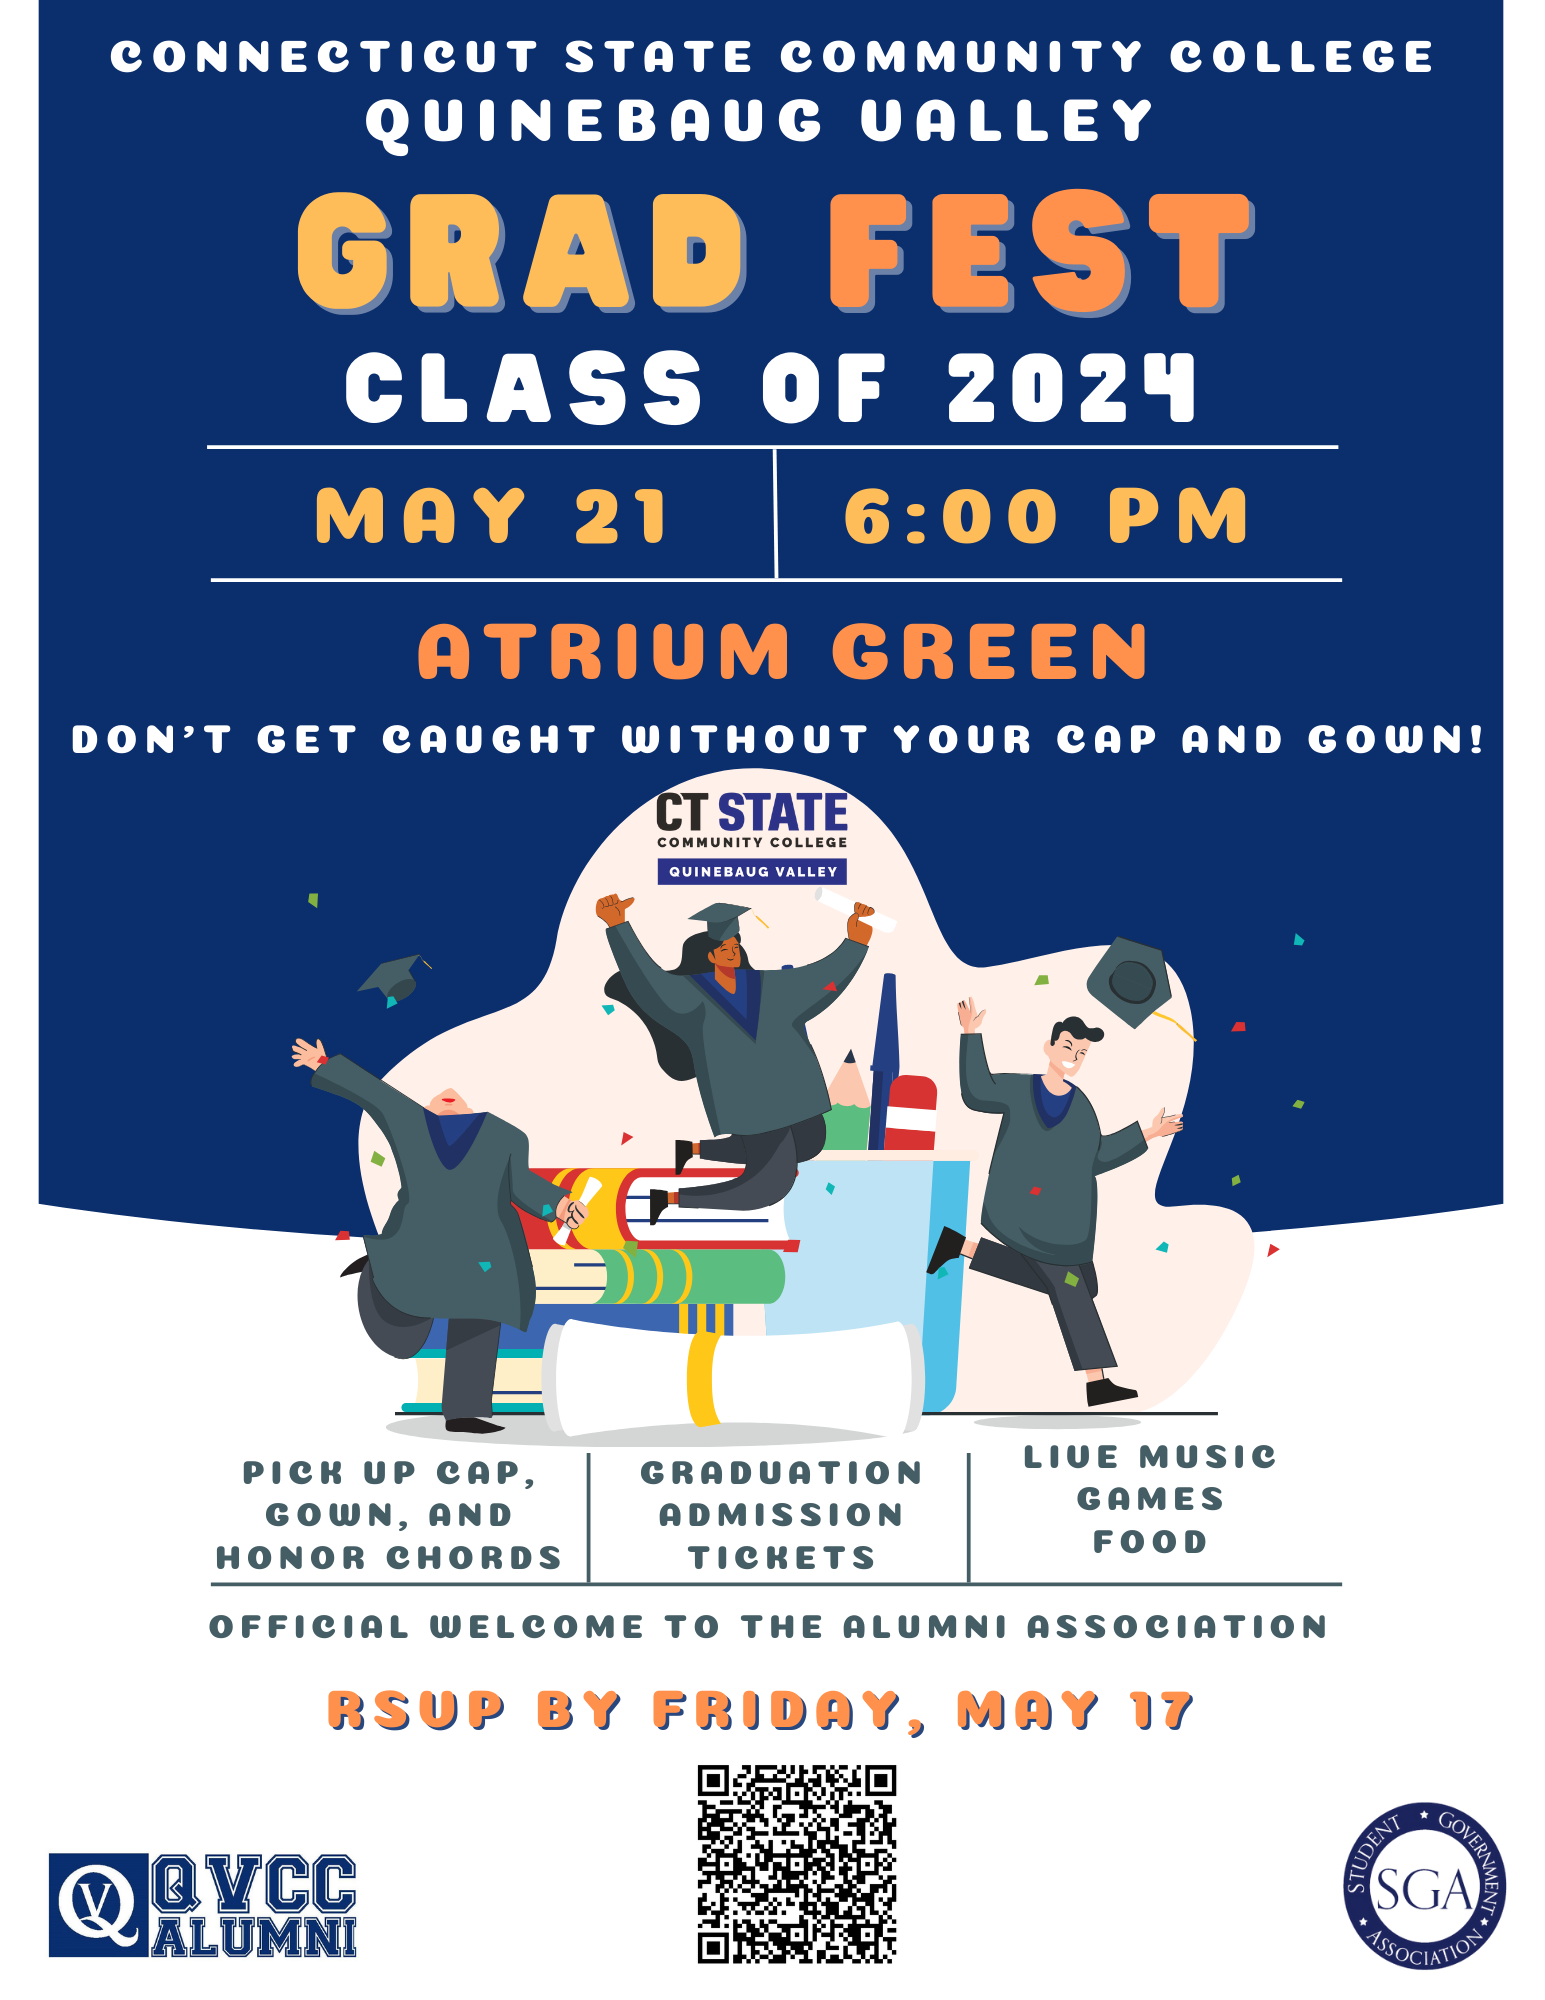 CONNECTICUT STATE COMMUNITY COLLEGE QUINEBAUG UALLEY GRAD FEST CLASS OF 2024 MAY 21 6:00 PM ATRIUM GREEN